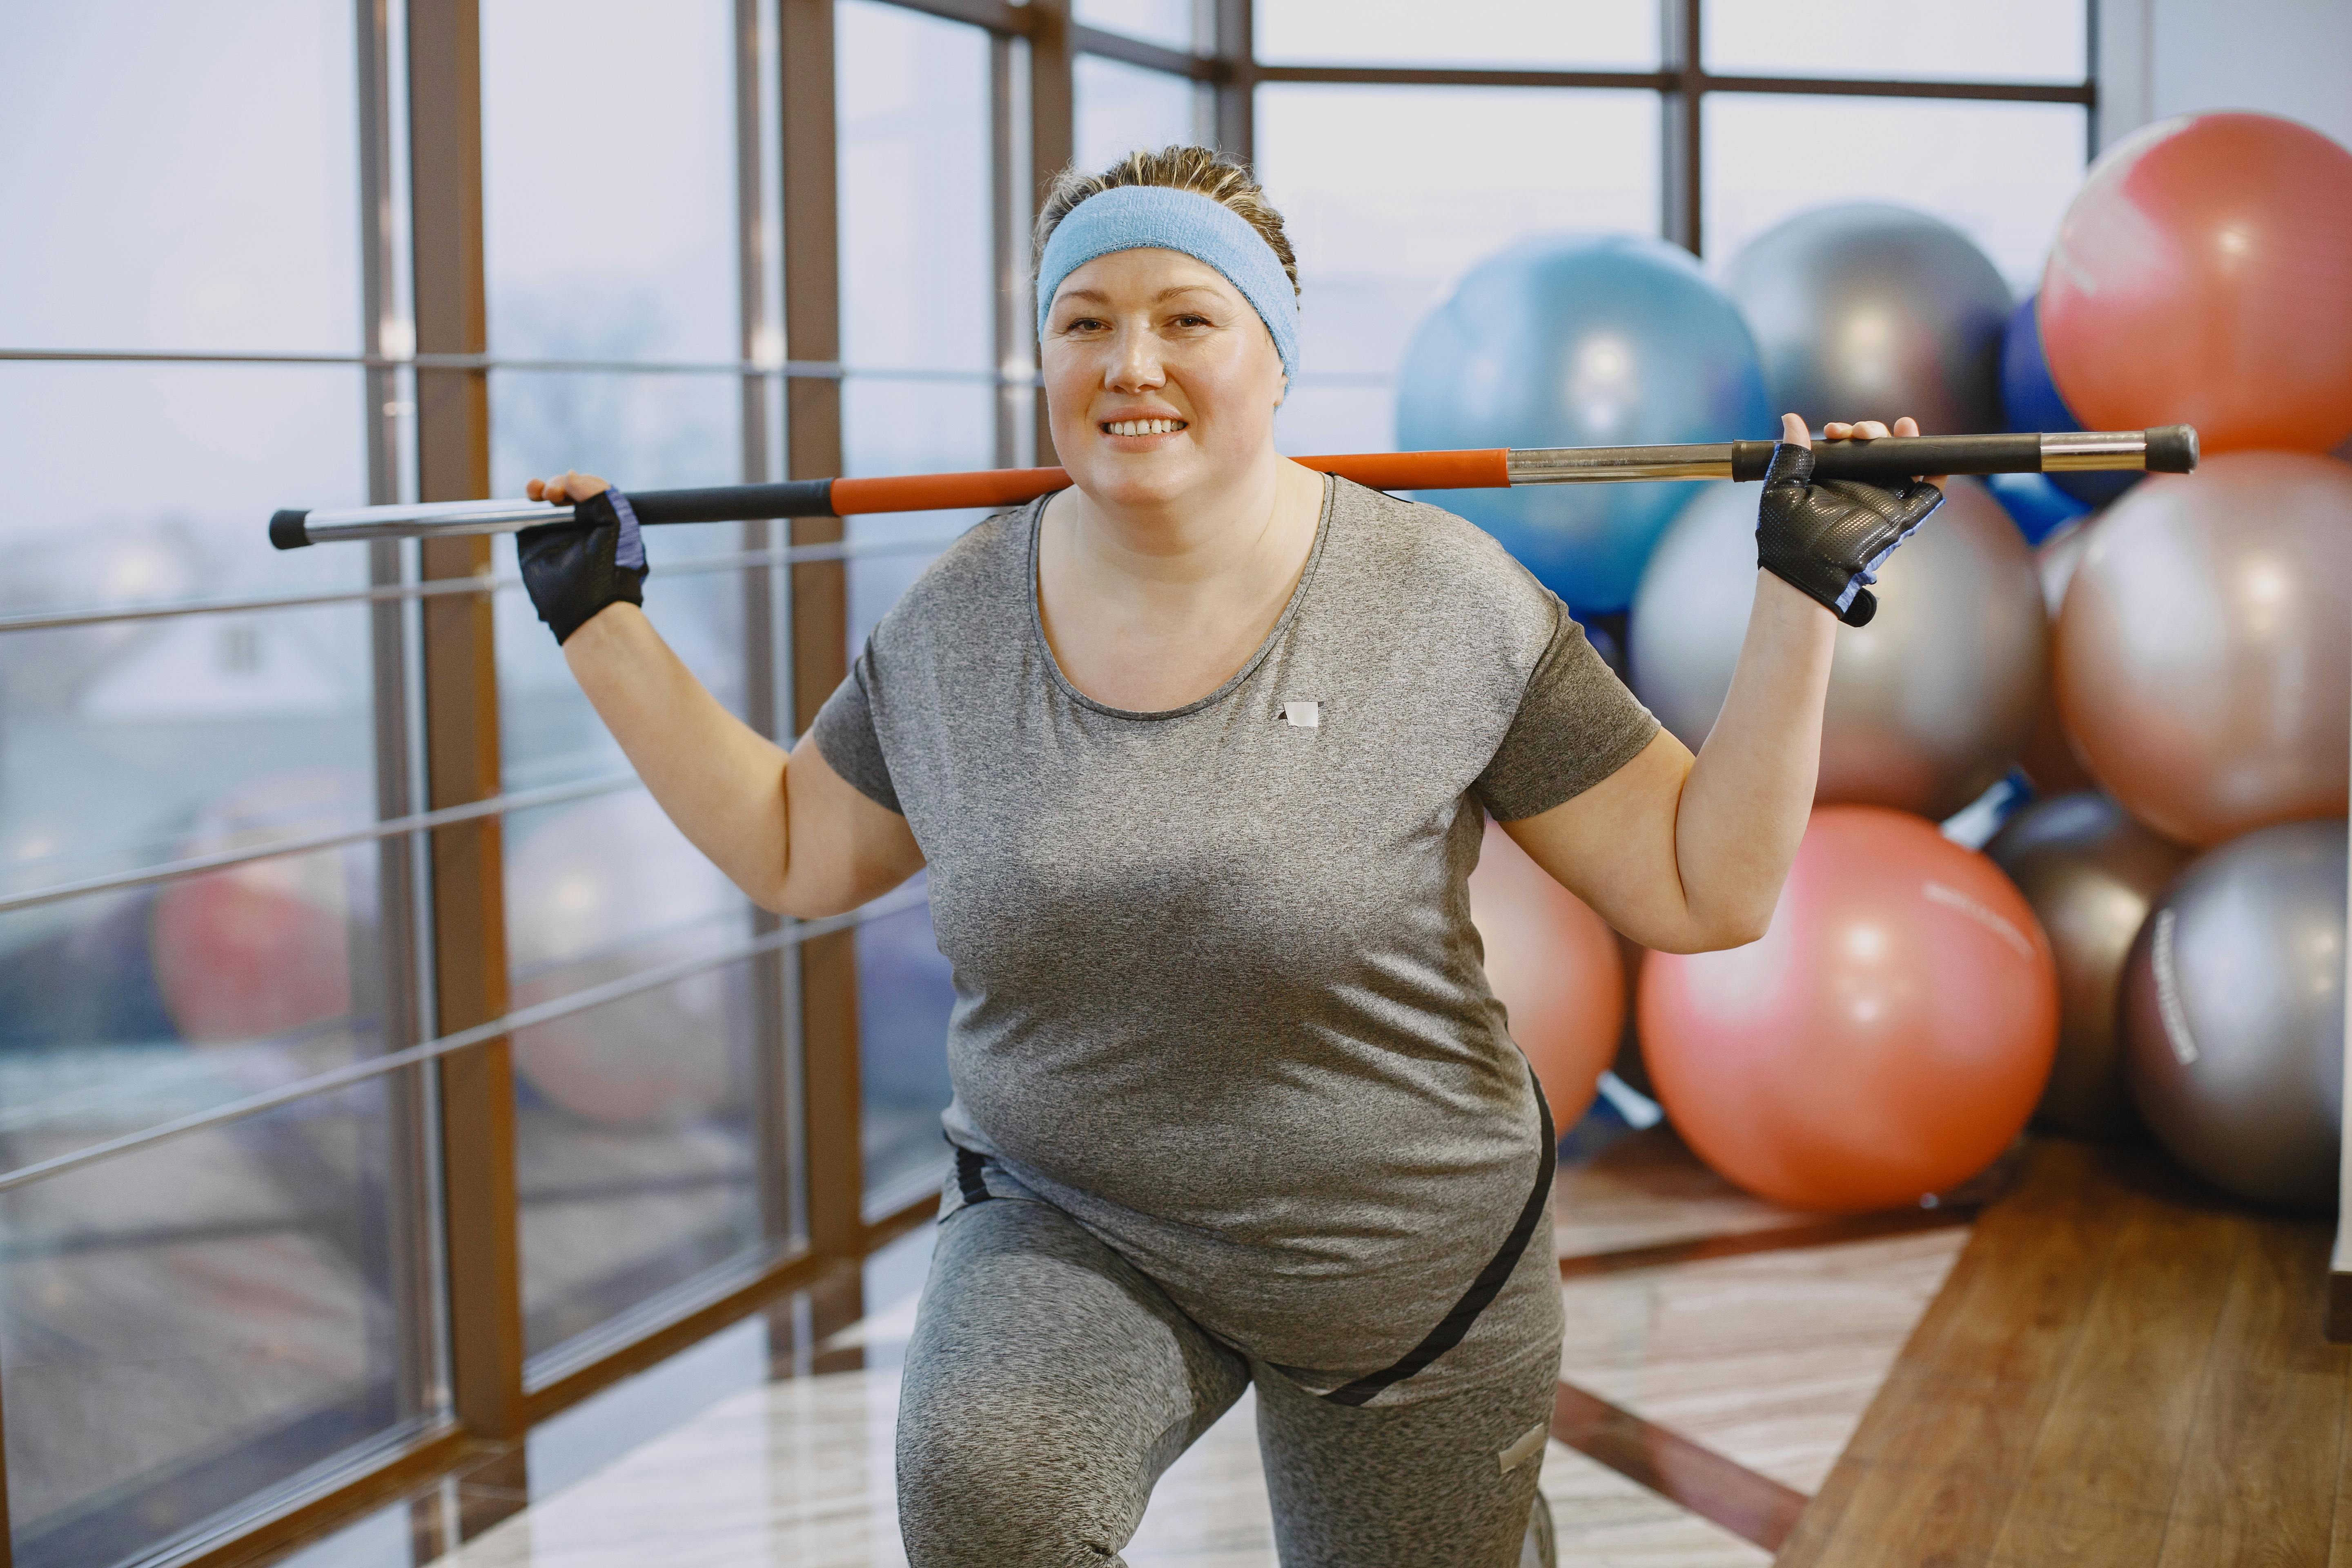 Woman Plus Size in Gym Doing Exercises with Training Apparatus, Stock Photo  - Image of health, lifestyle: 107825616